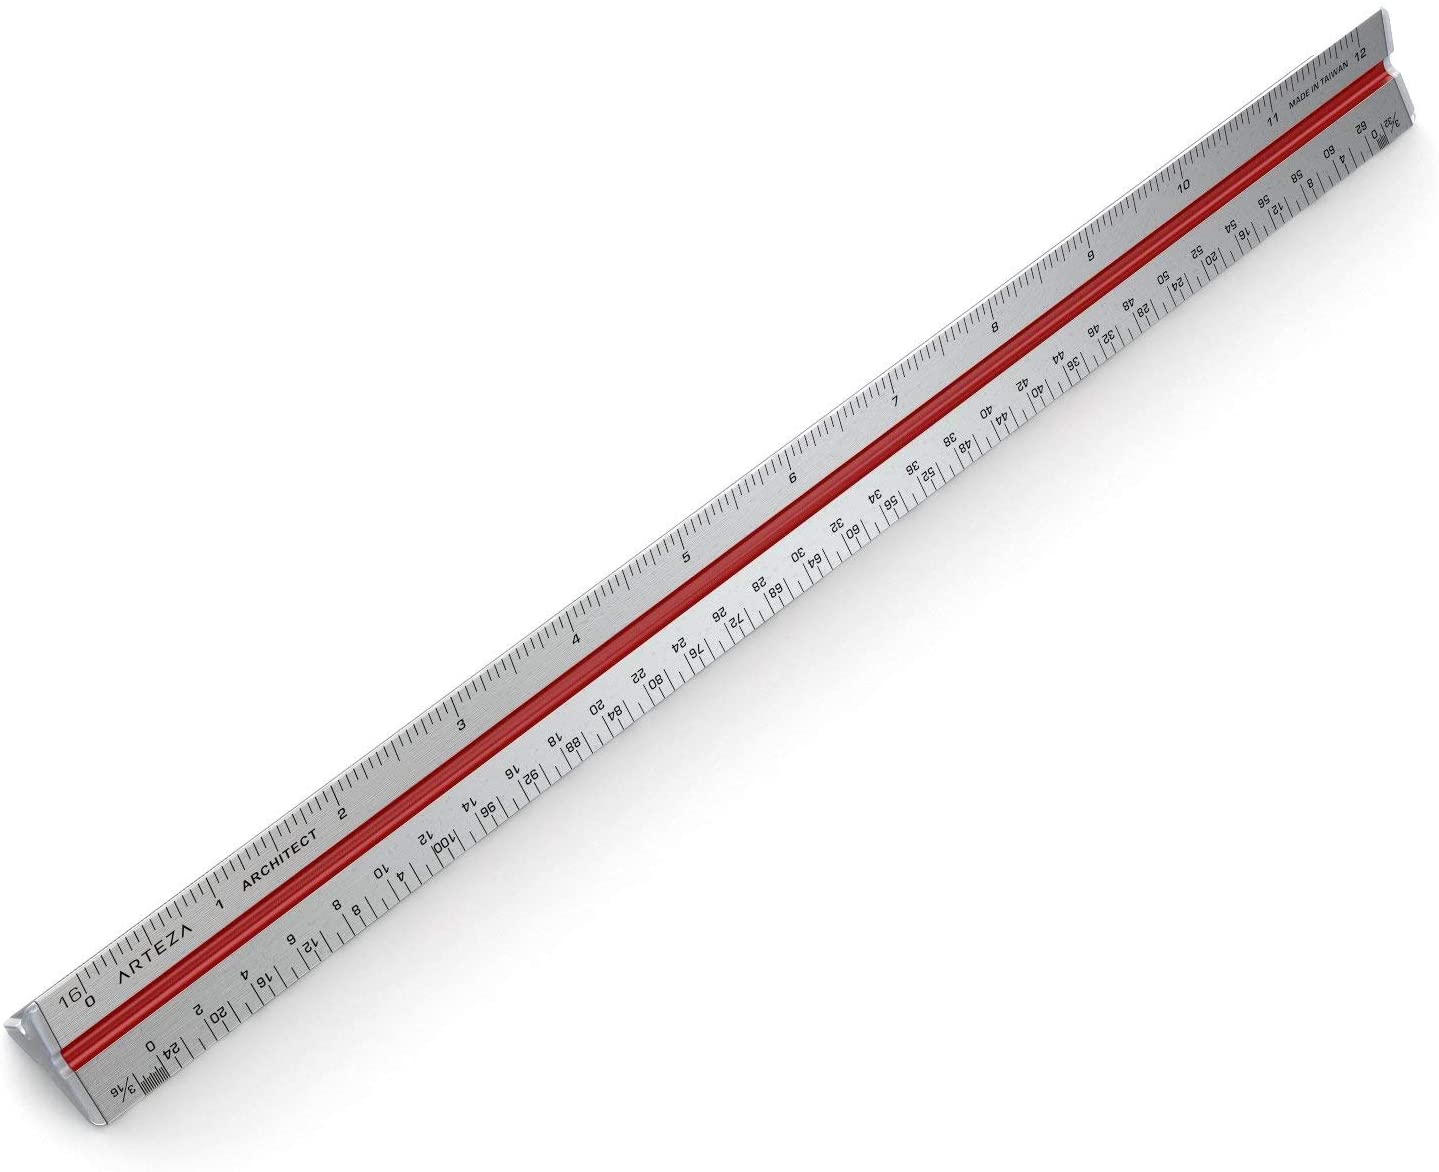 12,902 Architectural Scale Ruler Images, Stock Photos, 3D objects, &  Vectors